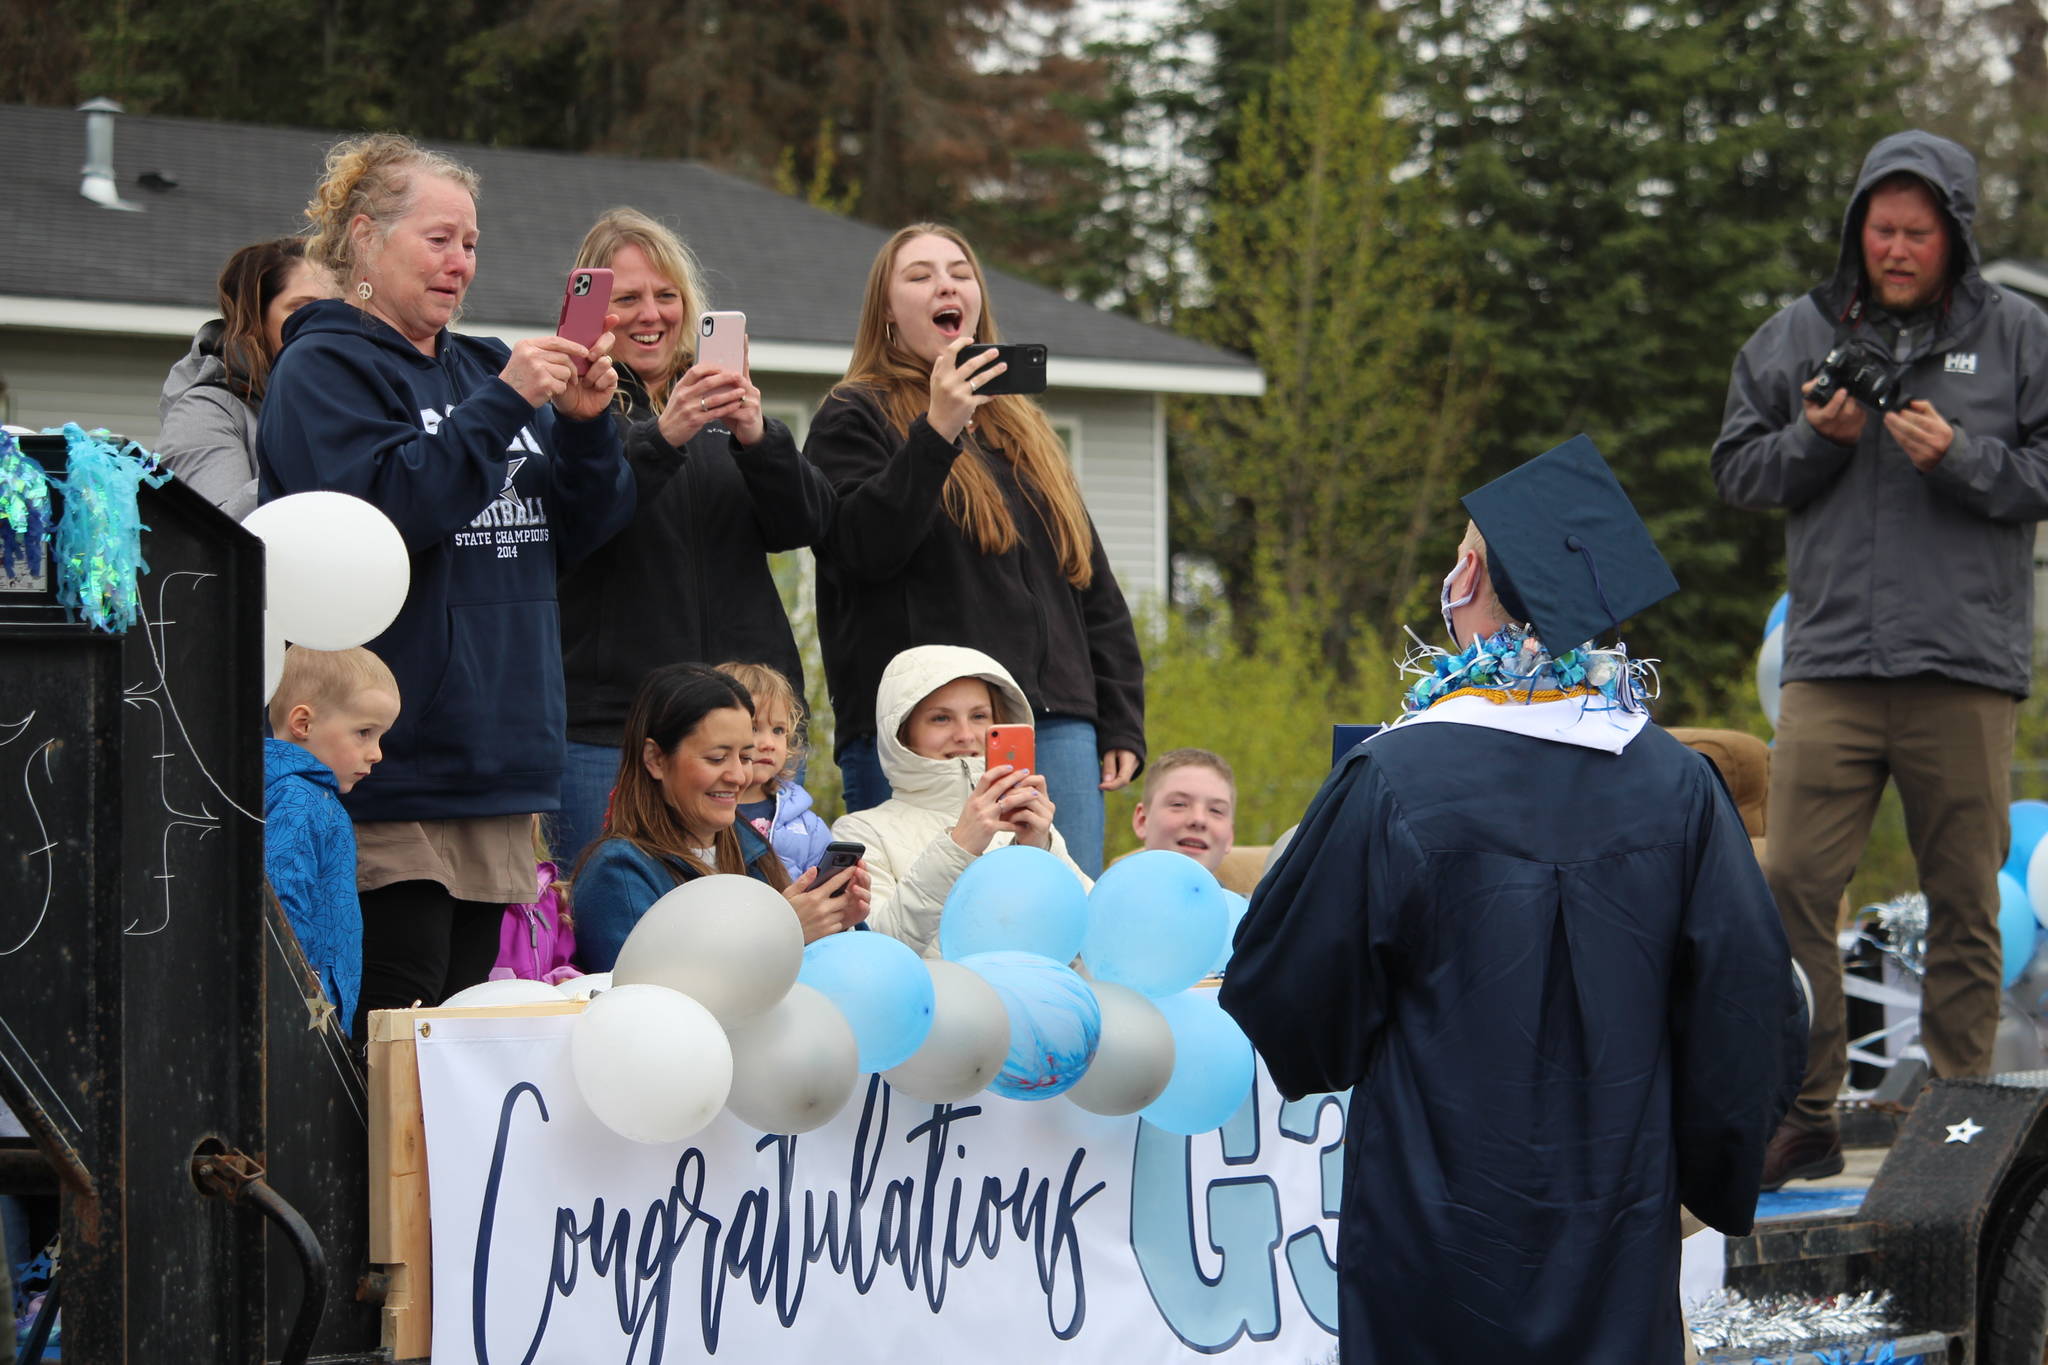 Friends and family of Galen Brantley III cheer him on as he graduates from Soldotna High School on May 18, 2020. (Photo by Brian Mazurek/Peninsula Clarion)